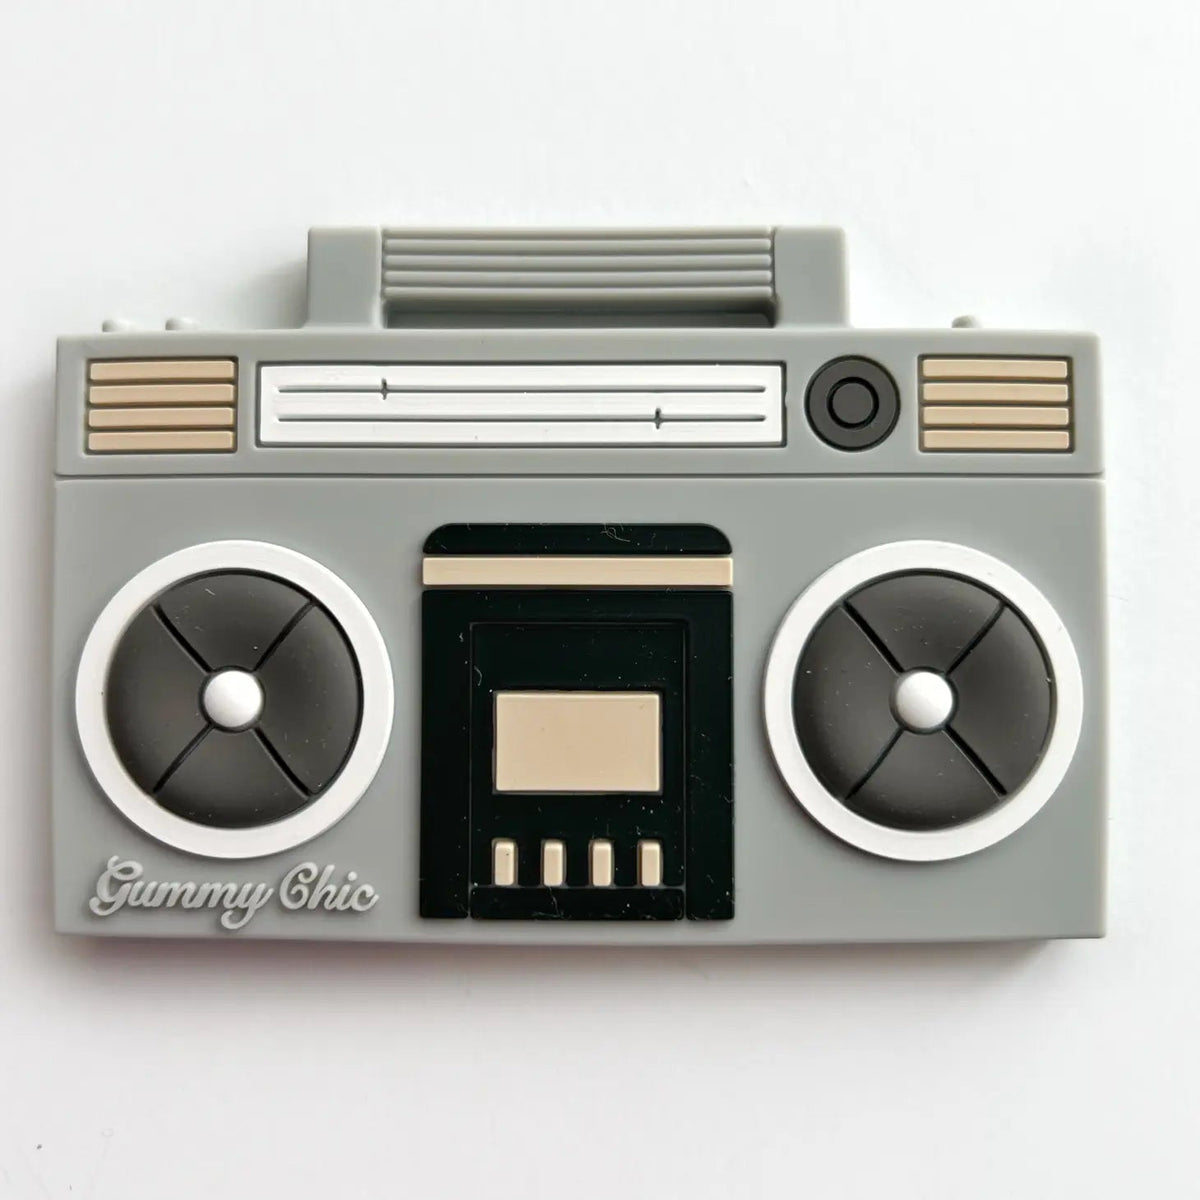 Boom Box Silicone Teether by Gummy Chic